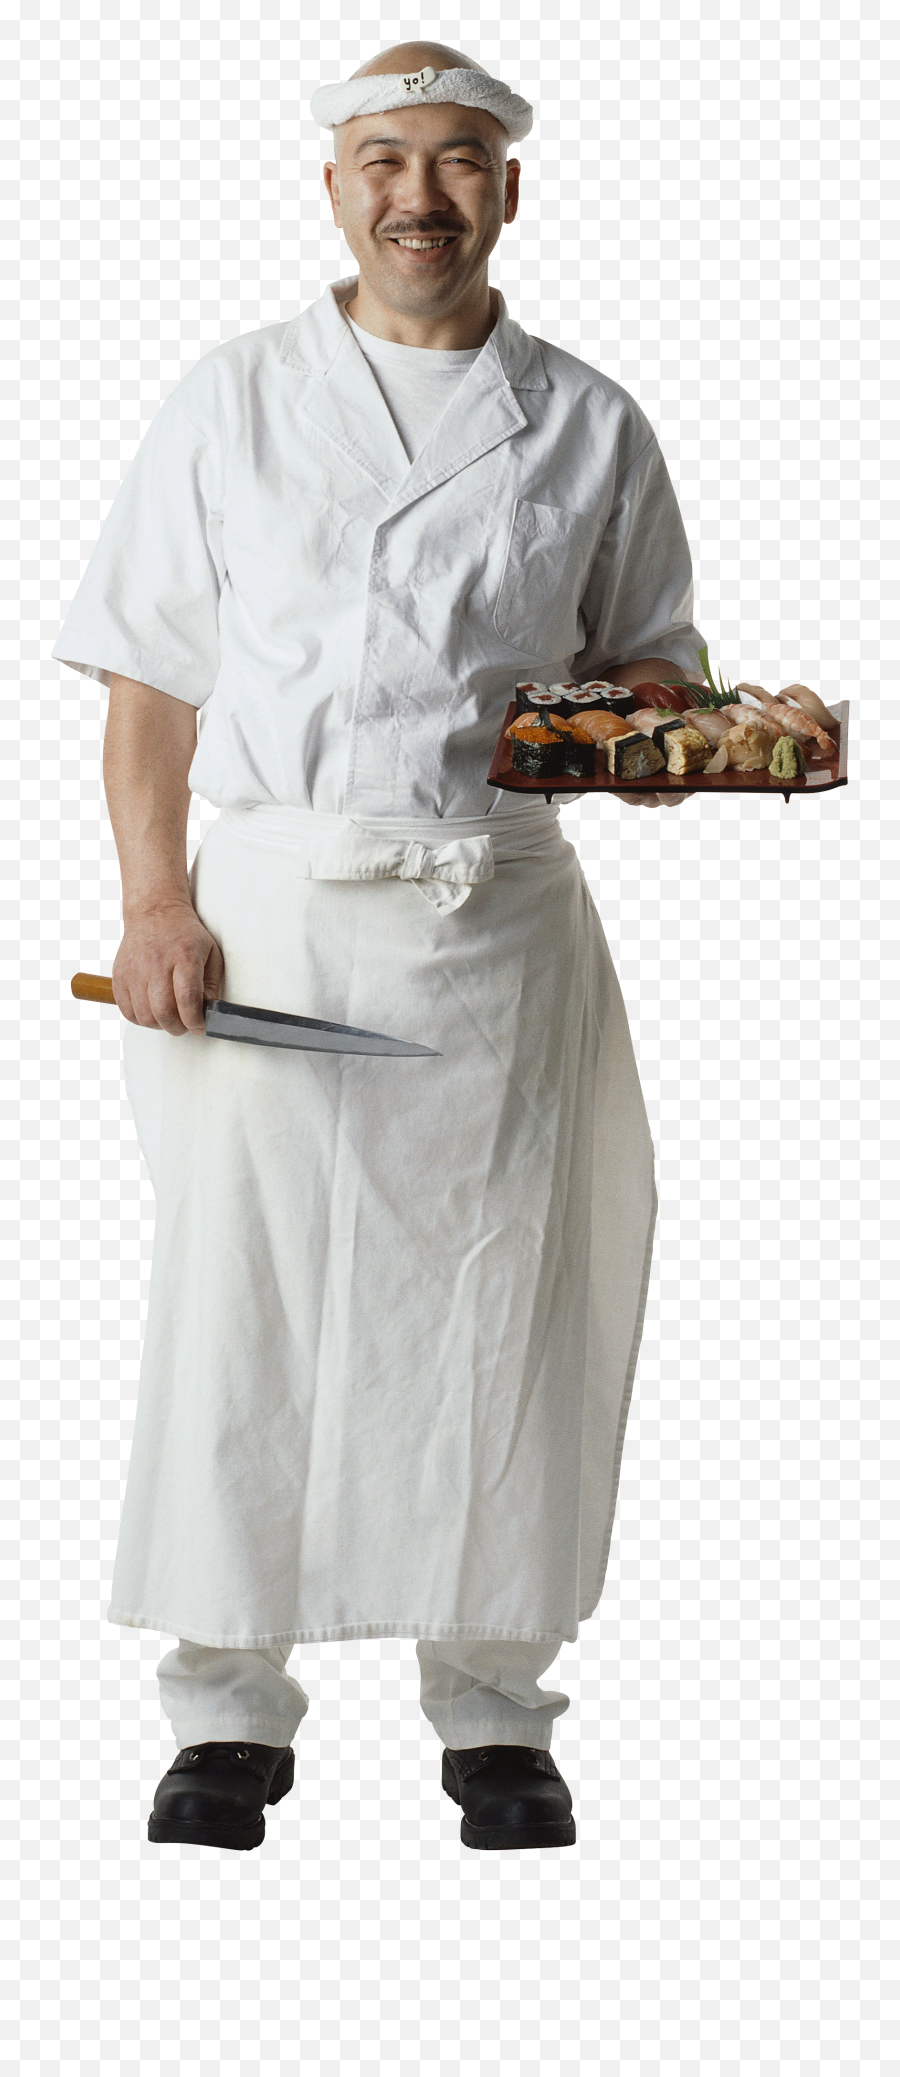 Chef Png Image - Happy Emoji,Chef Png